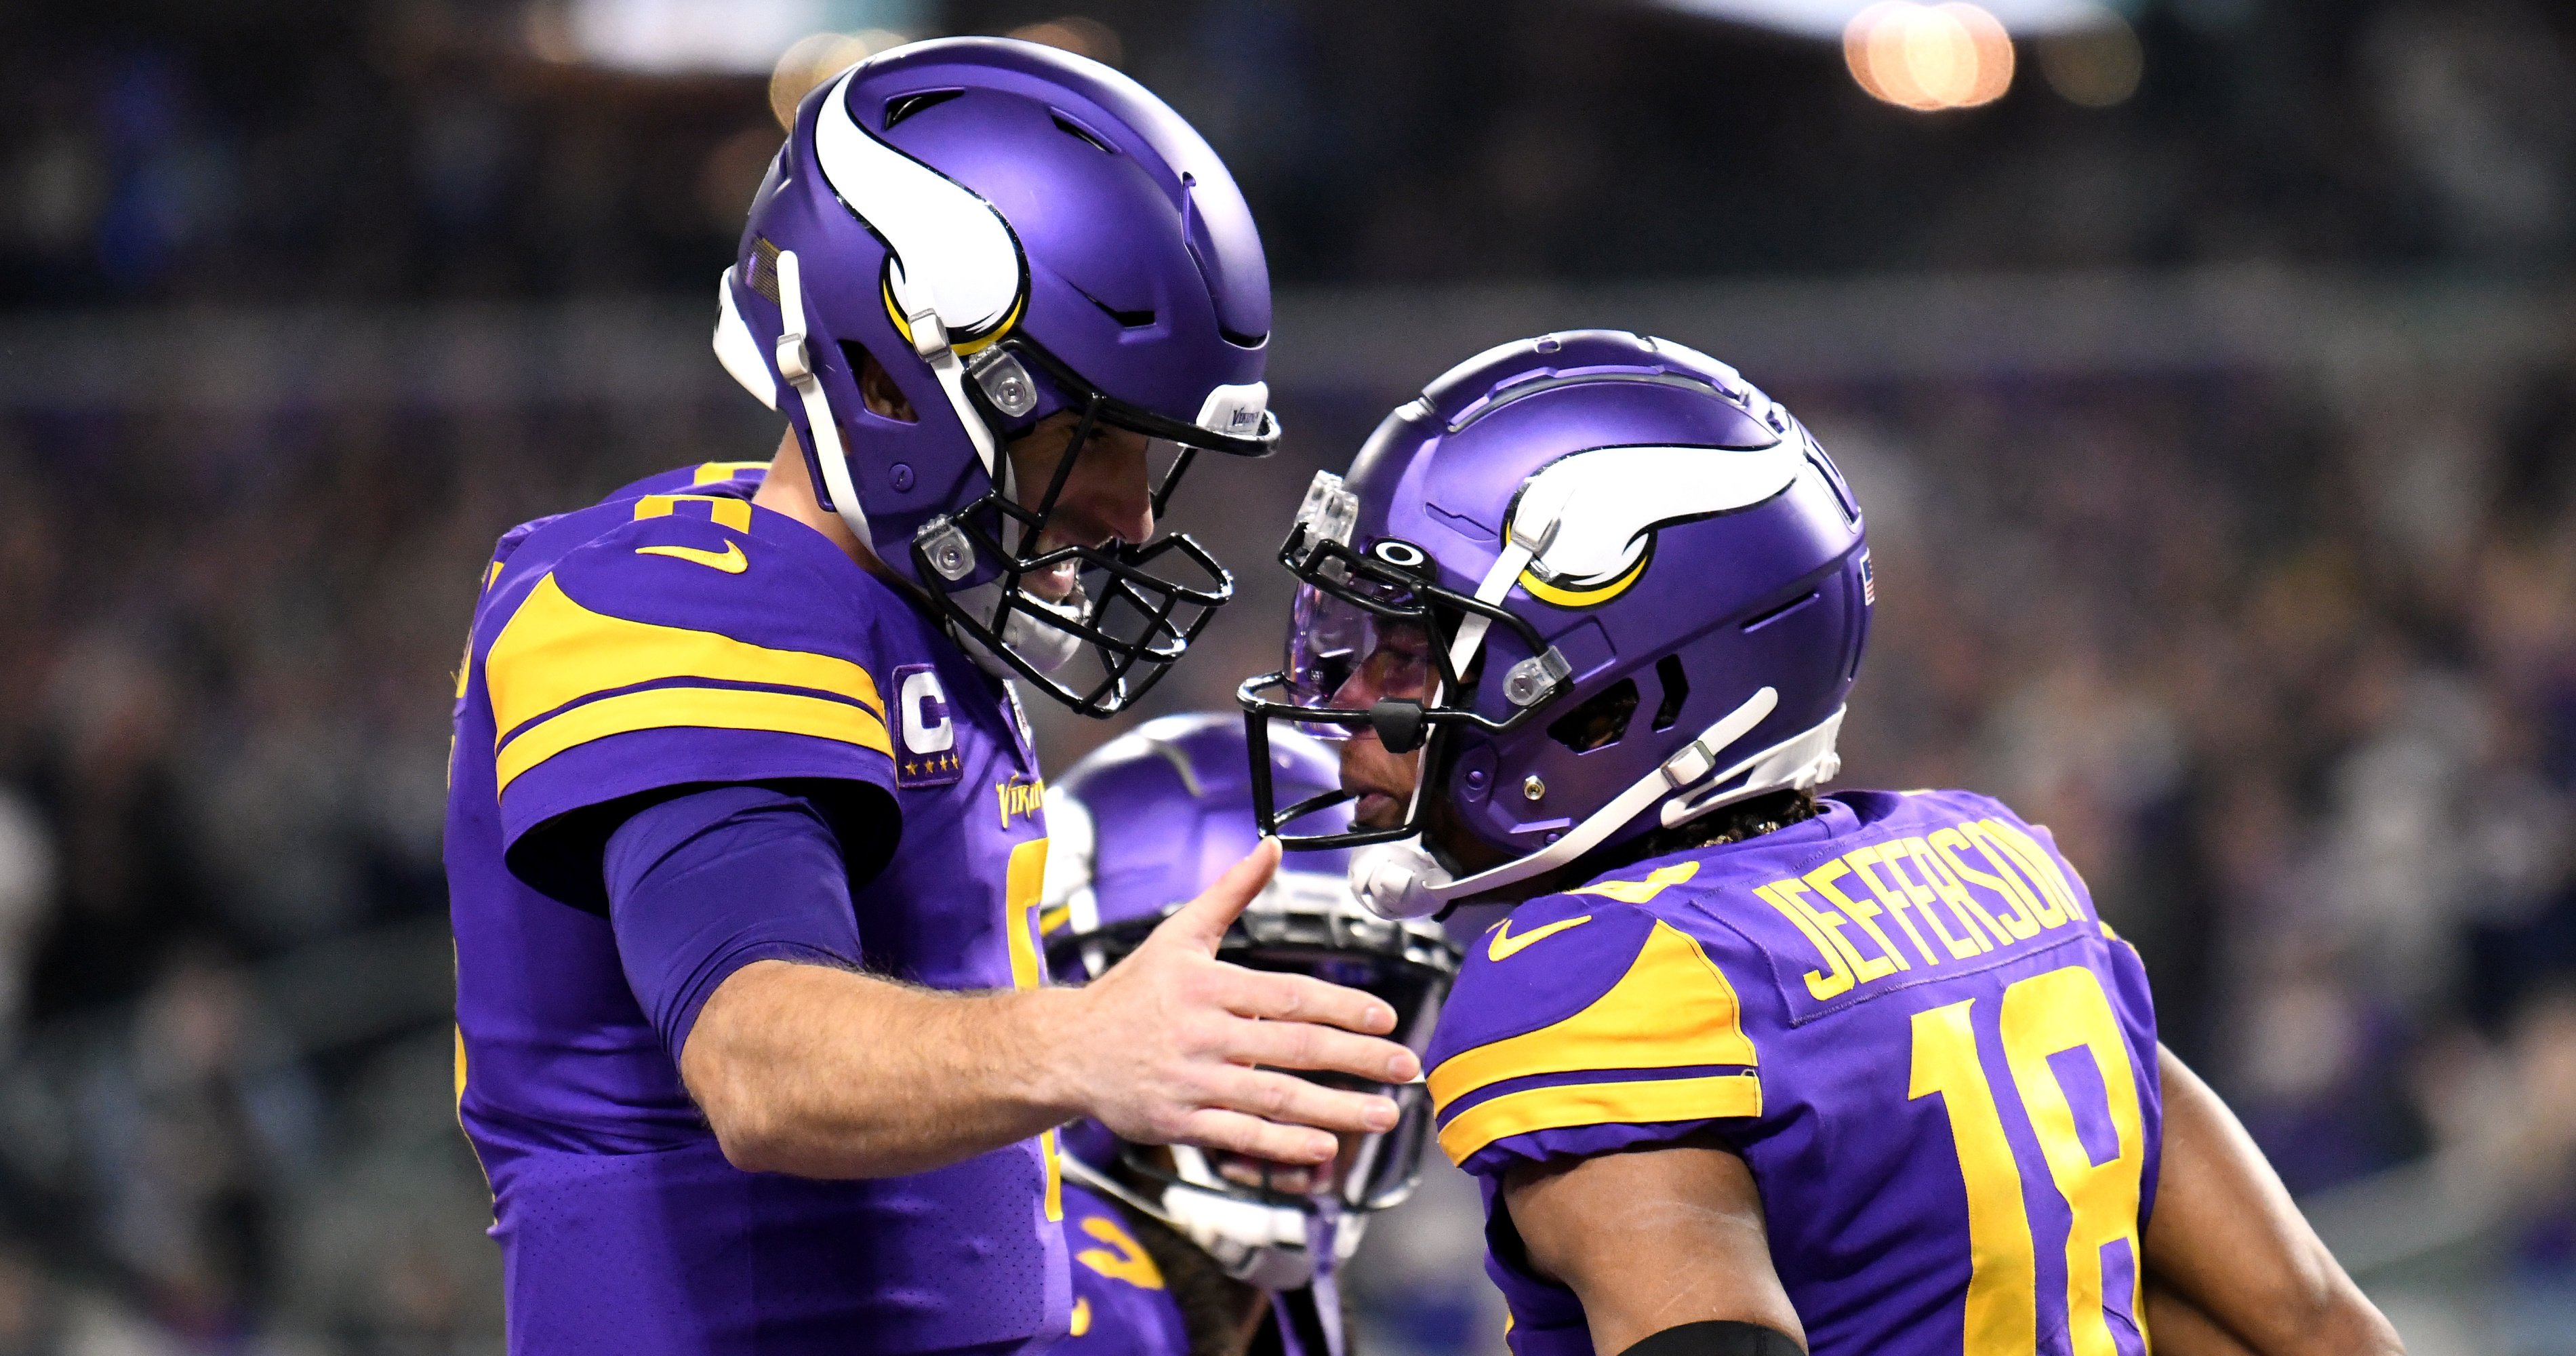 2022 Minnesota Vikings Schedule: Full Listing of Dates, Times and